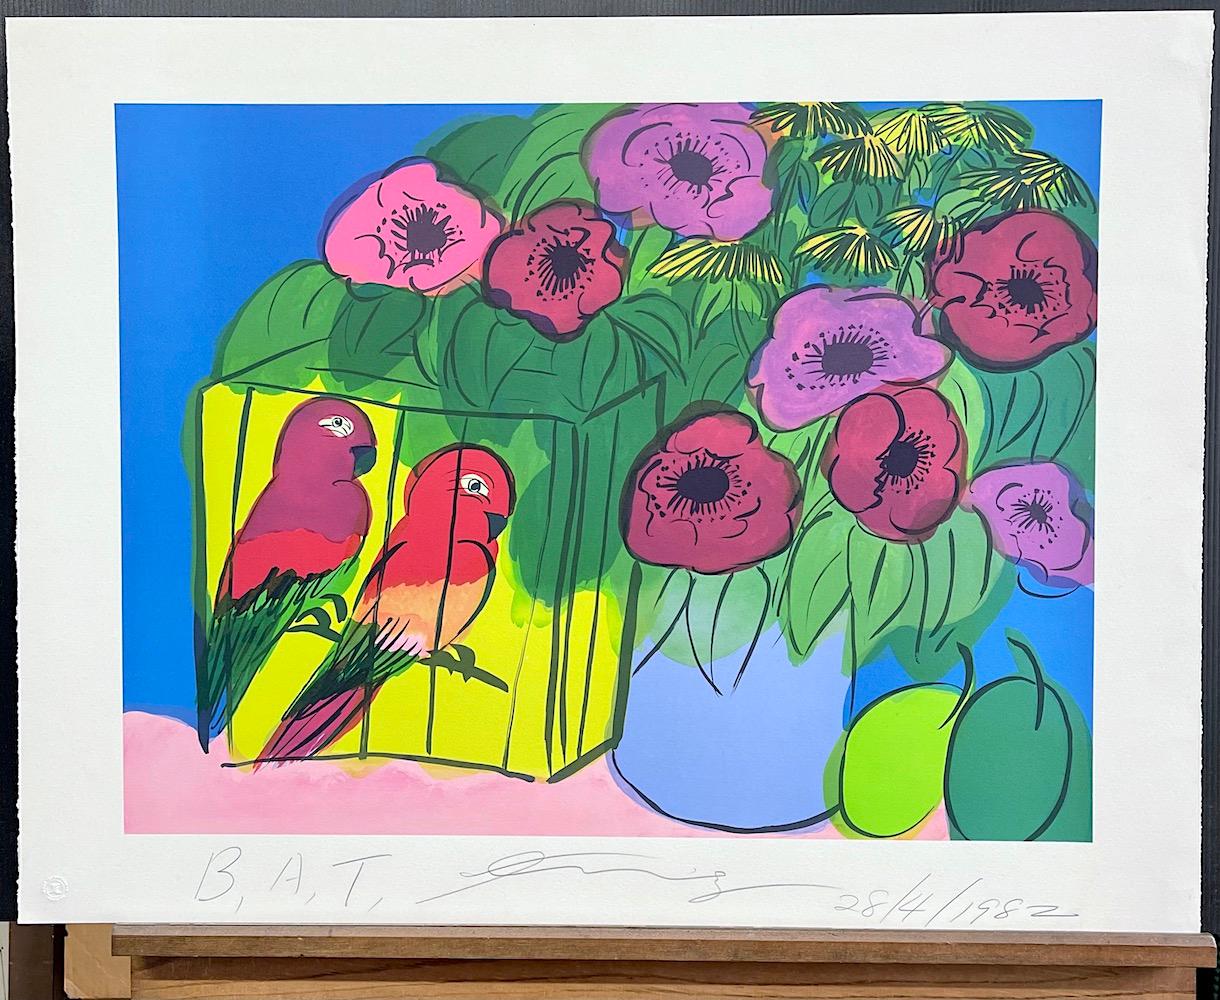 PARROTS AND FLOWERS is an original hand drawn lithograph by the renowned Chinese born artist Walasse Ting (DING XIONGQUAN, Chinese, 1929-2010) printed on archival Somerset printmaking paper 100% acid free . Ting's use of bold colors and expressive